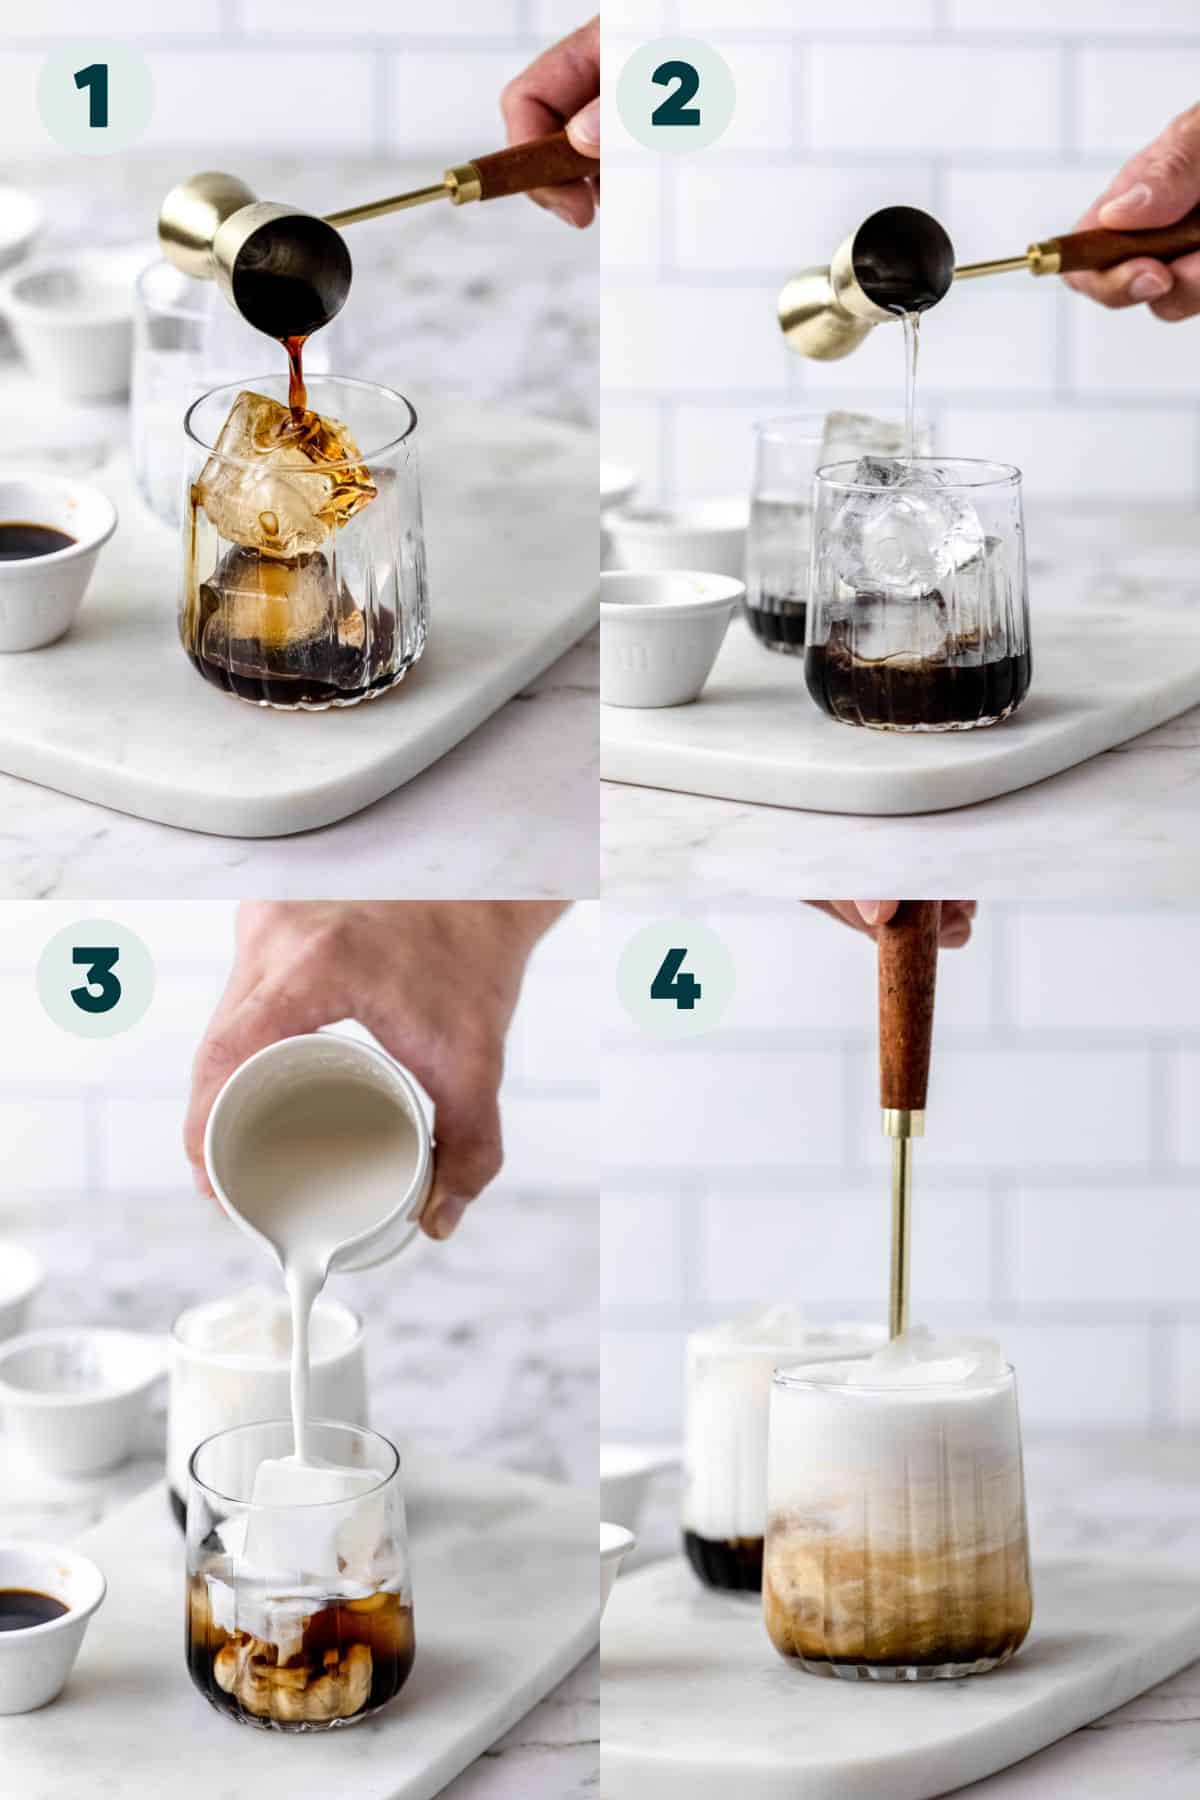 Step by step making a white russian.